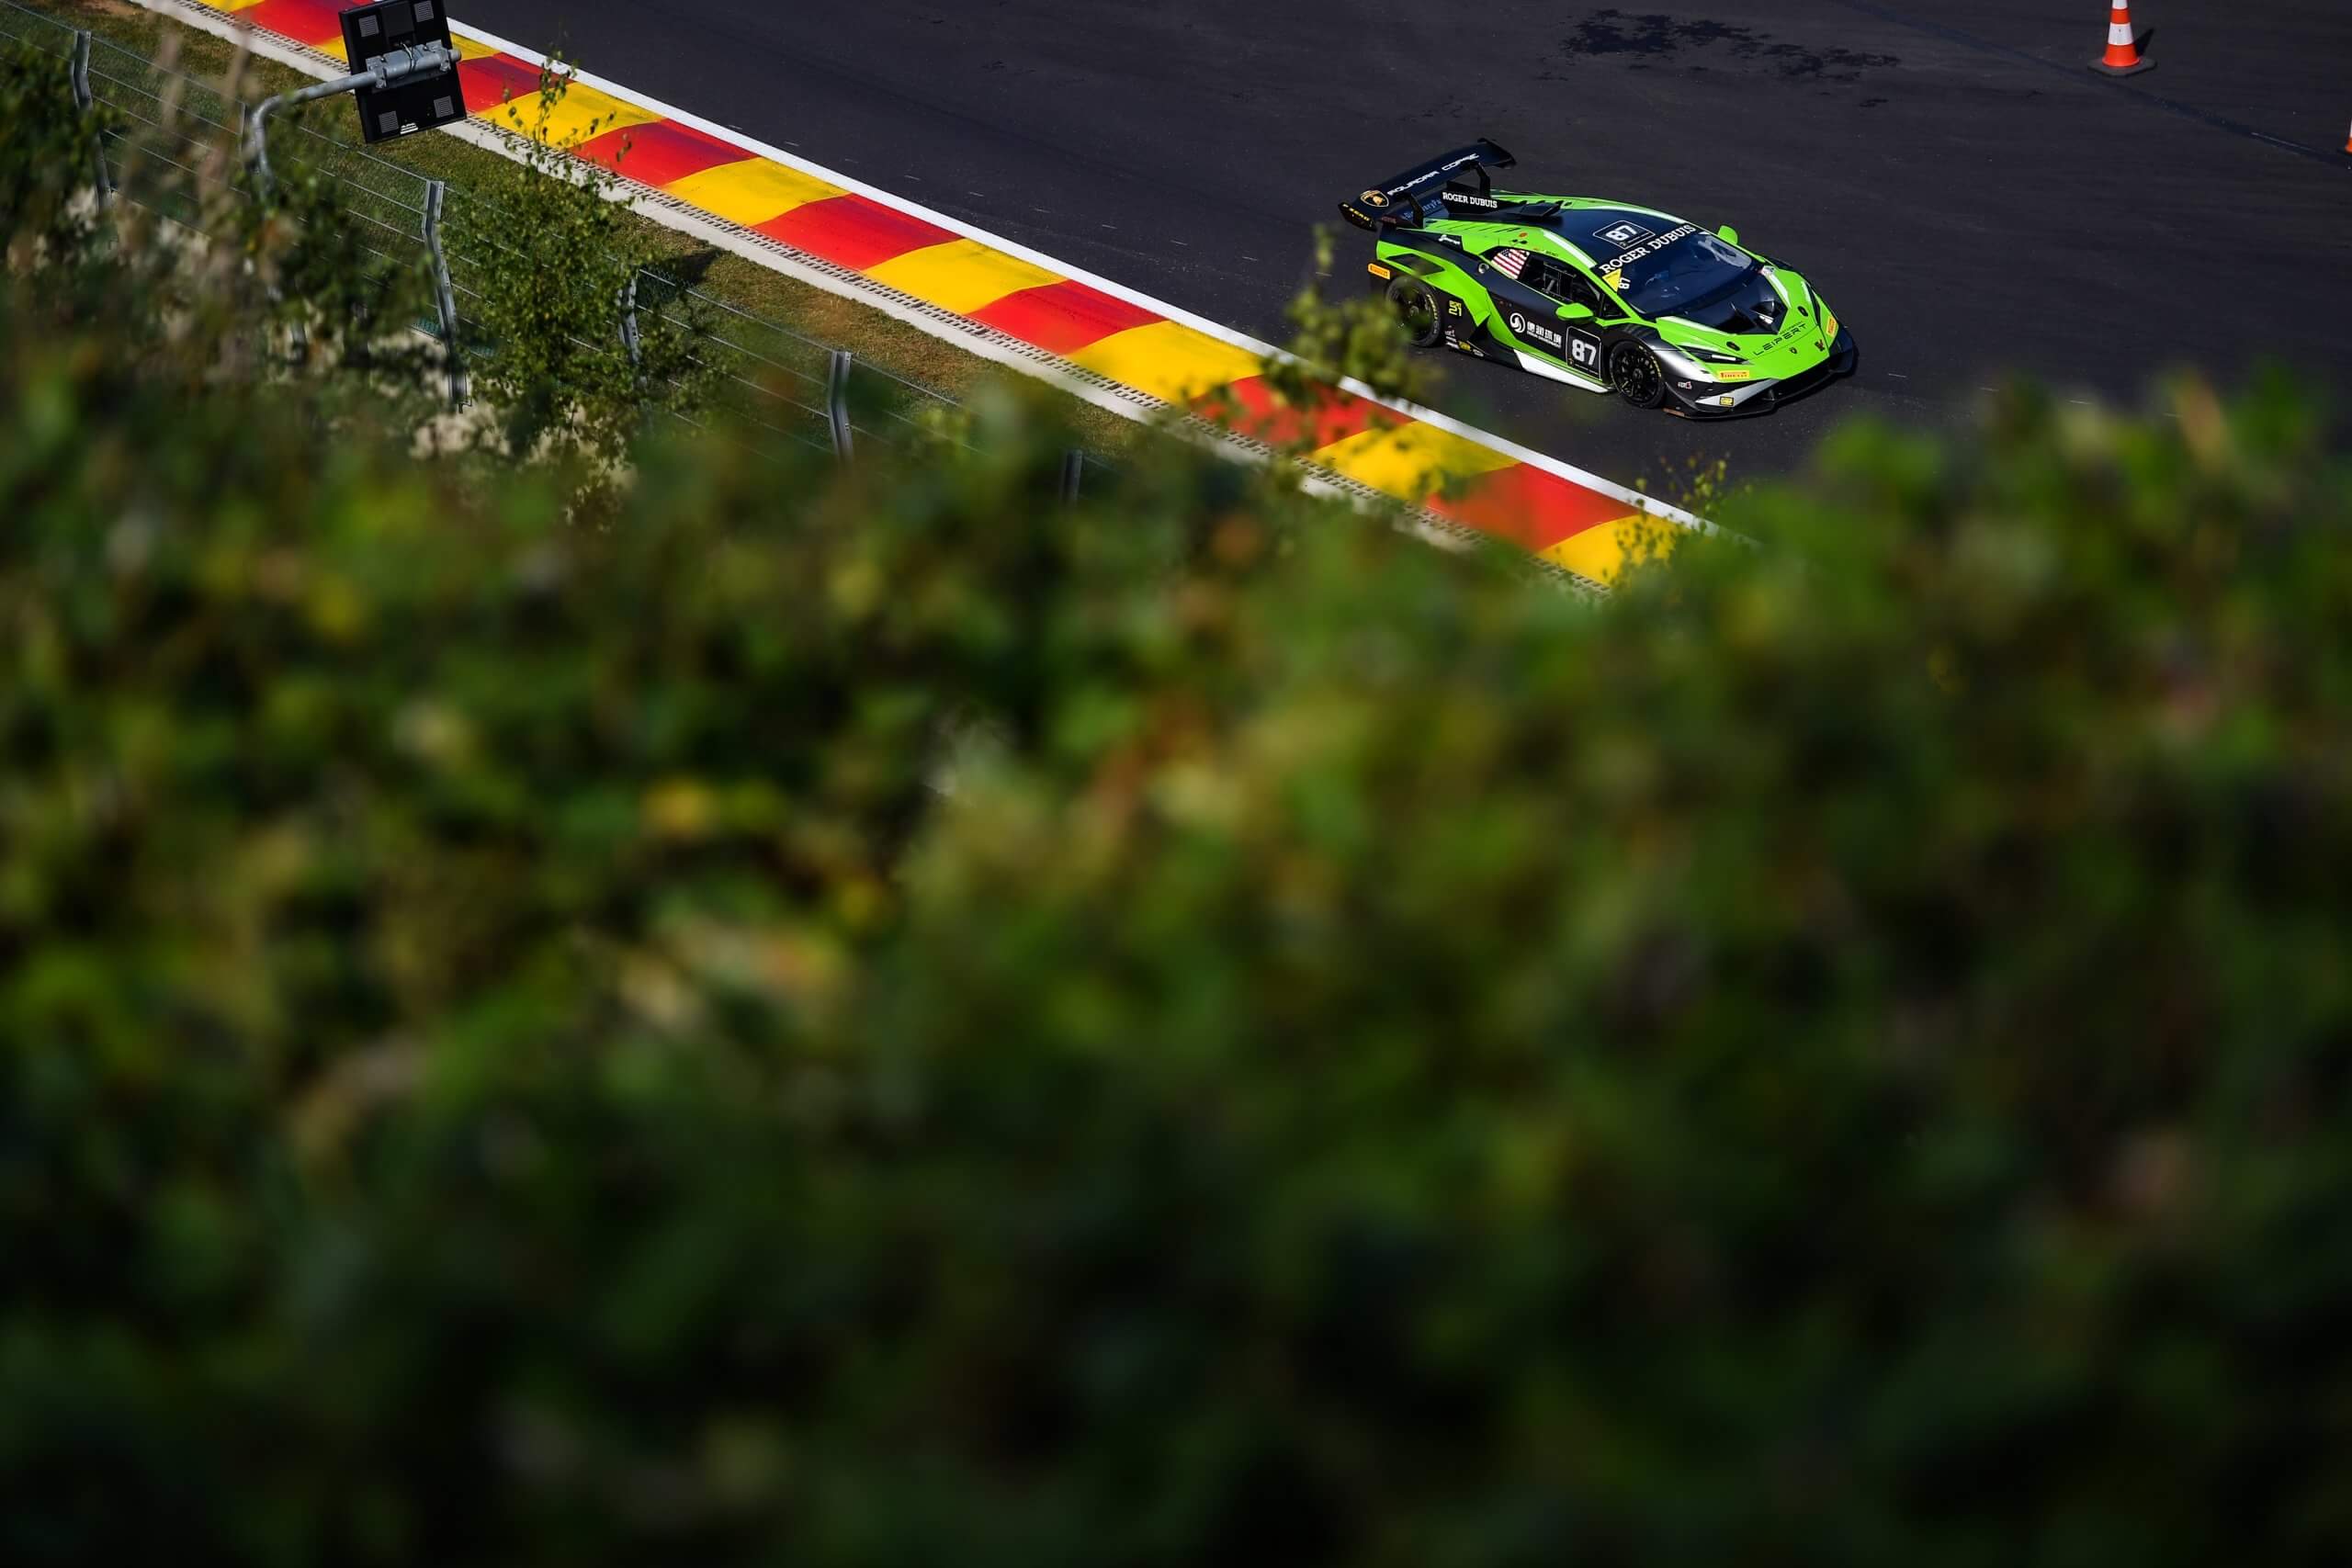 SPA SPEED UNREWARDED FOR BRUNOT AND LI IN SUPER TROFEO